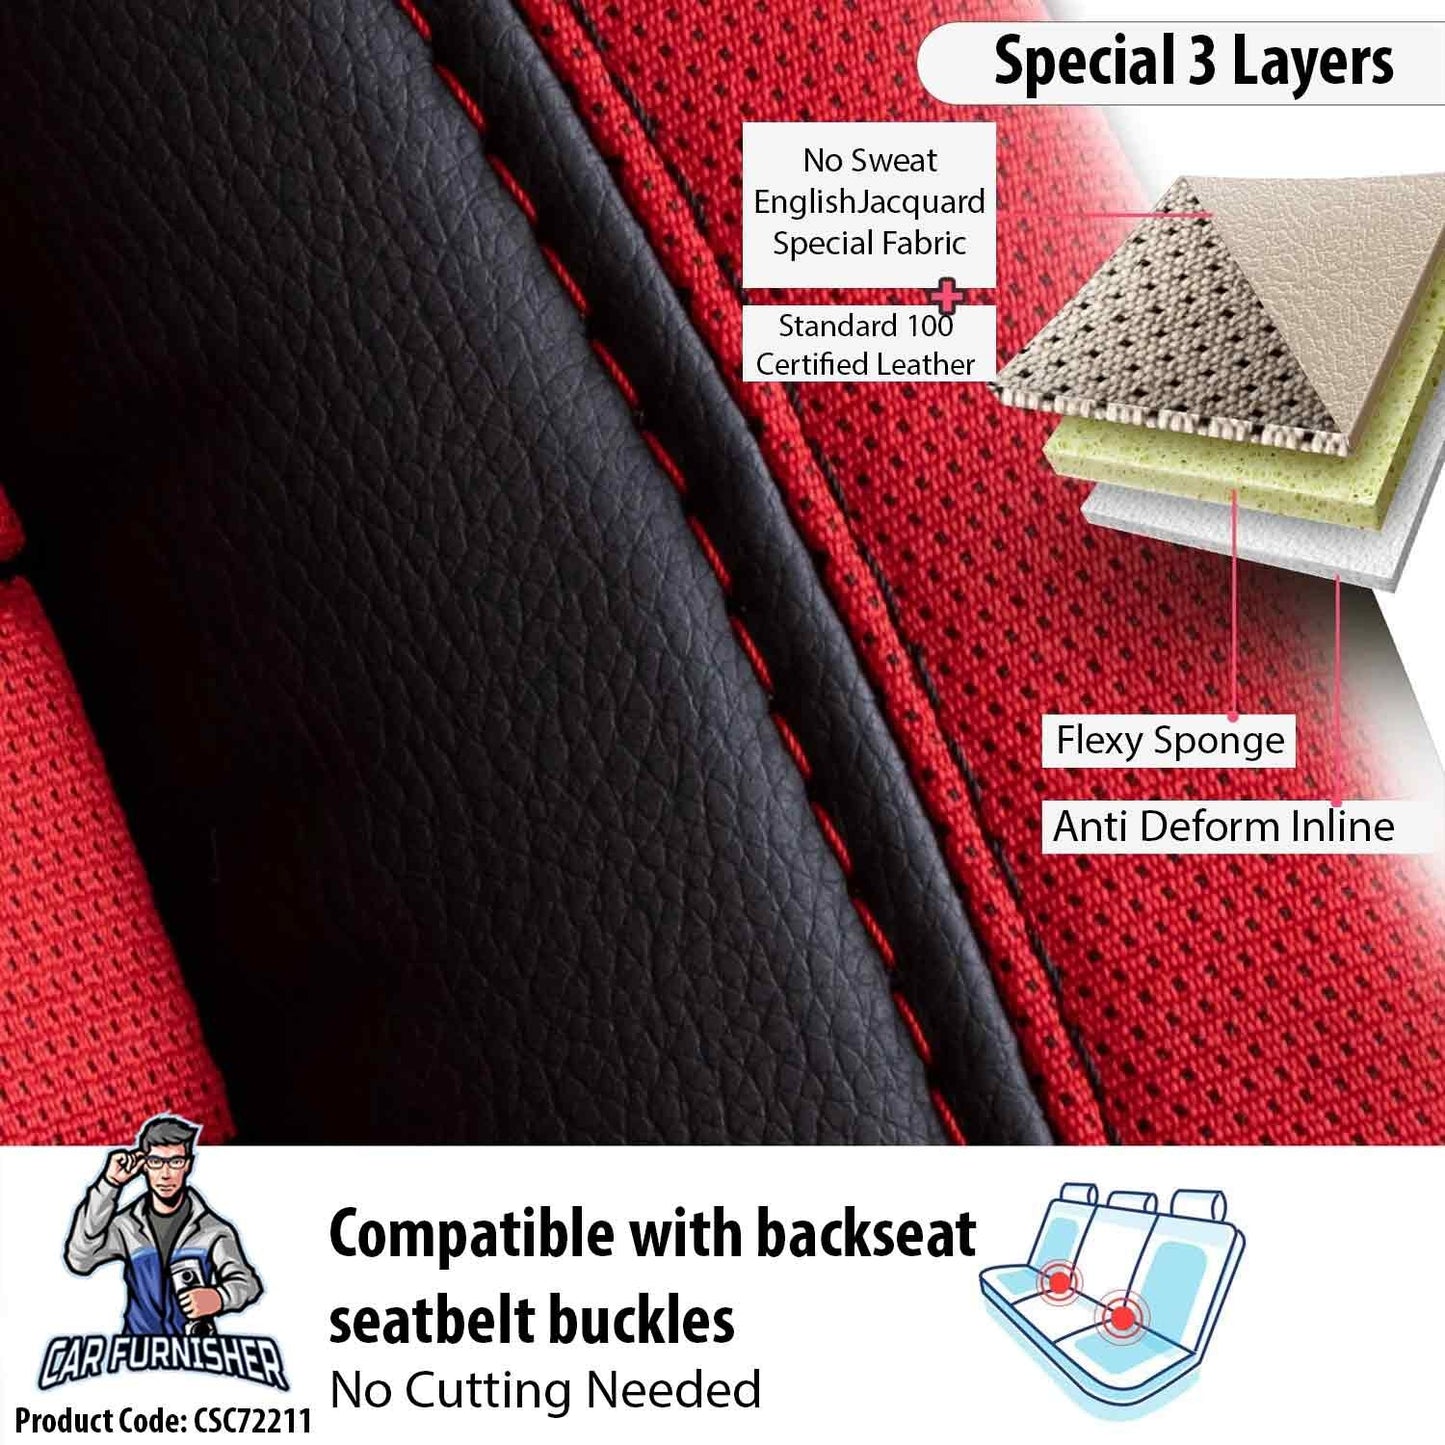 Car Seat Cover Set - London Design Red 5 Seats + Headrests (Full Set) Leather & Jacquard Fabric